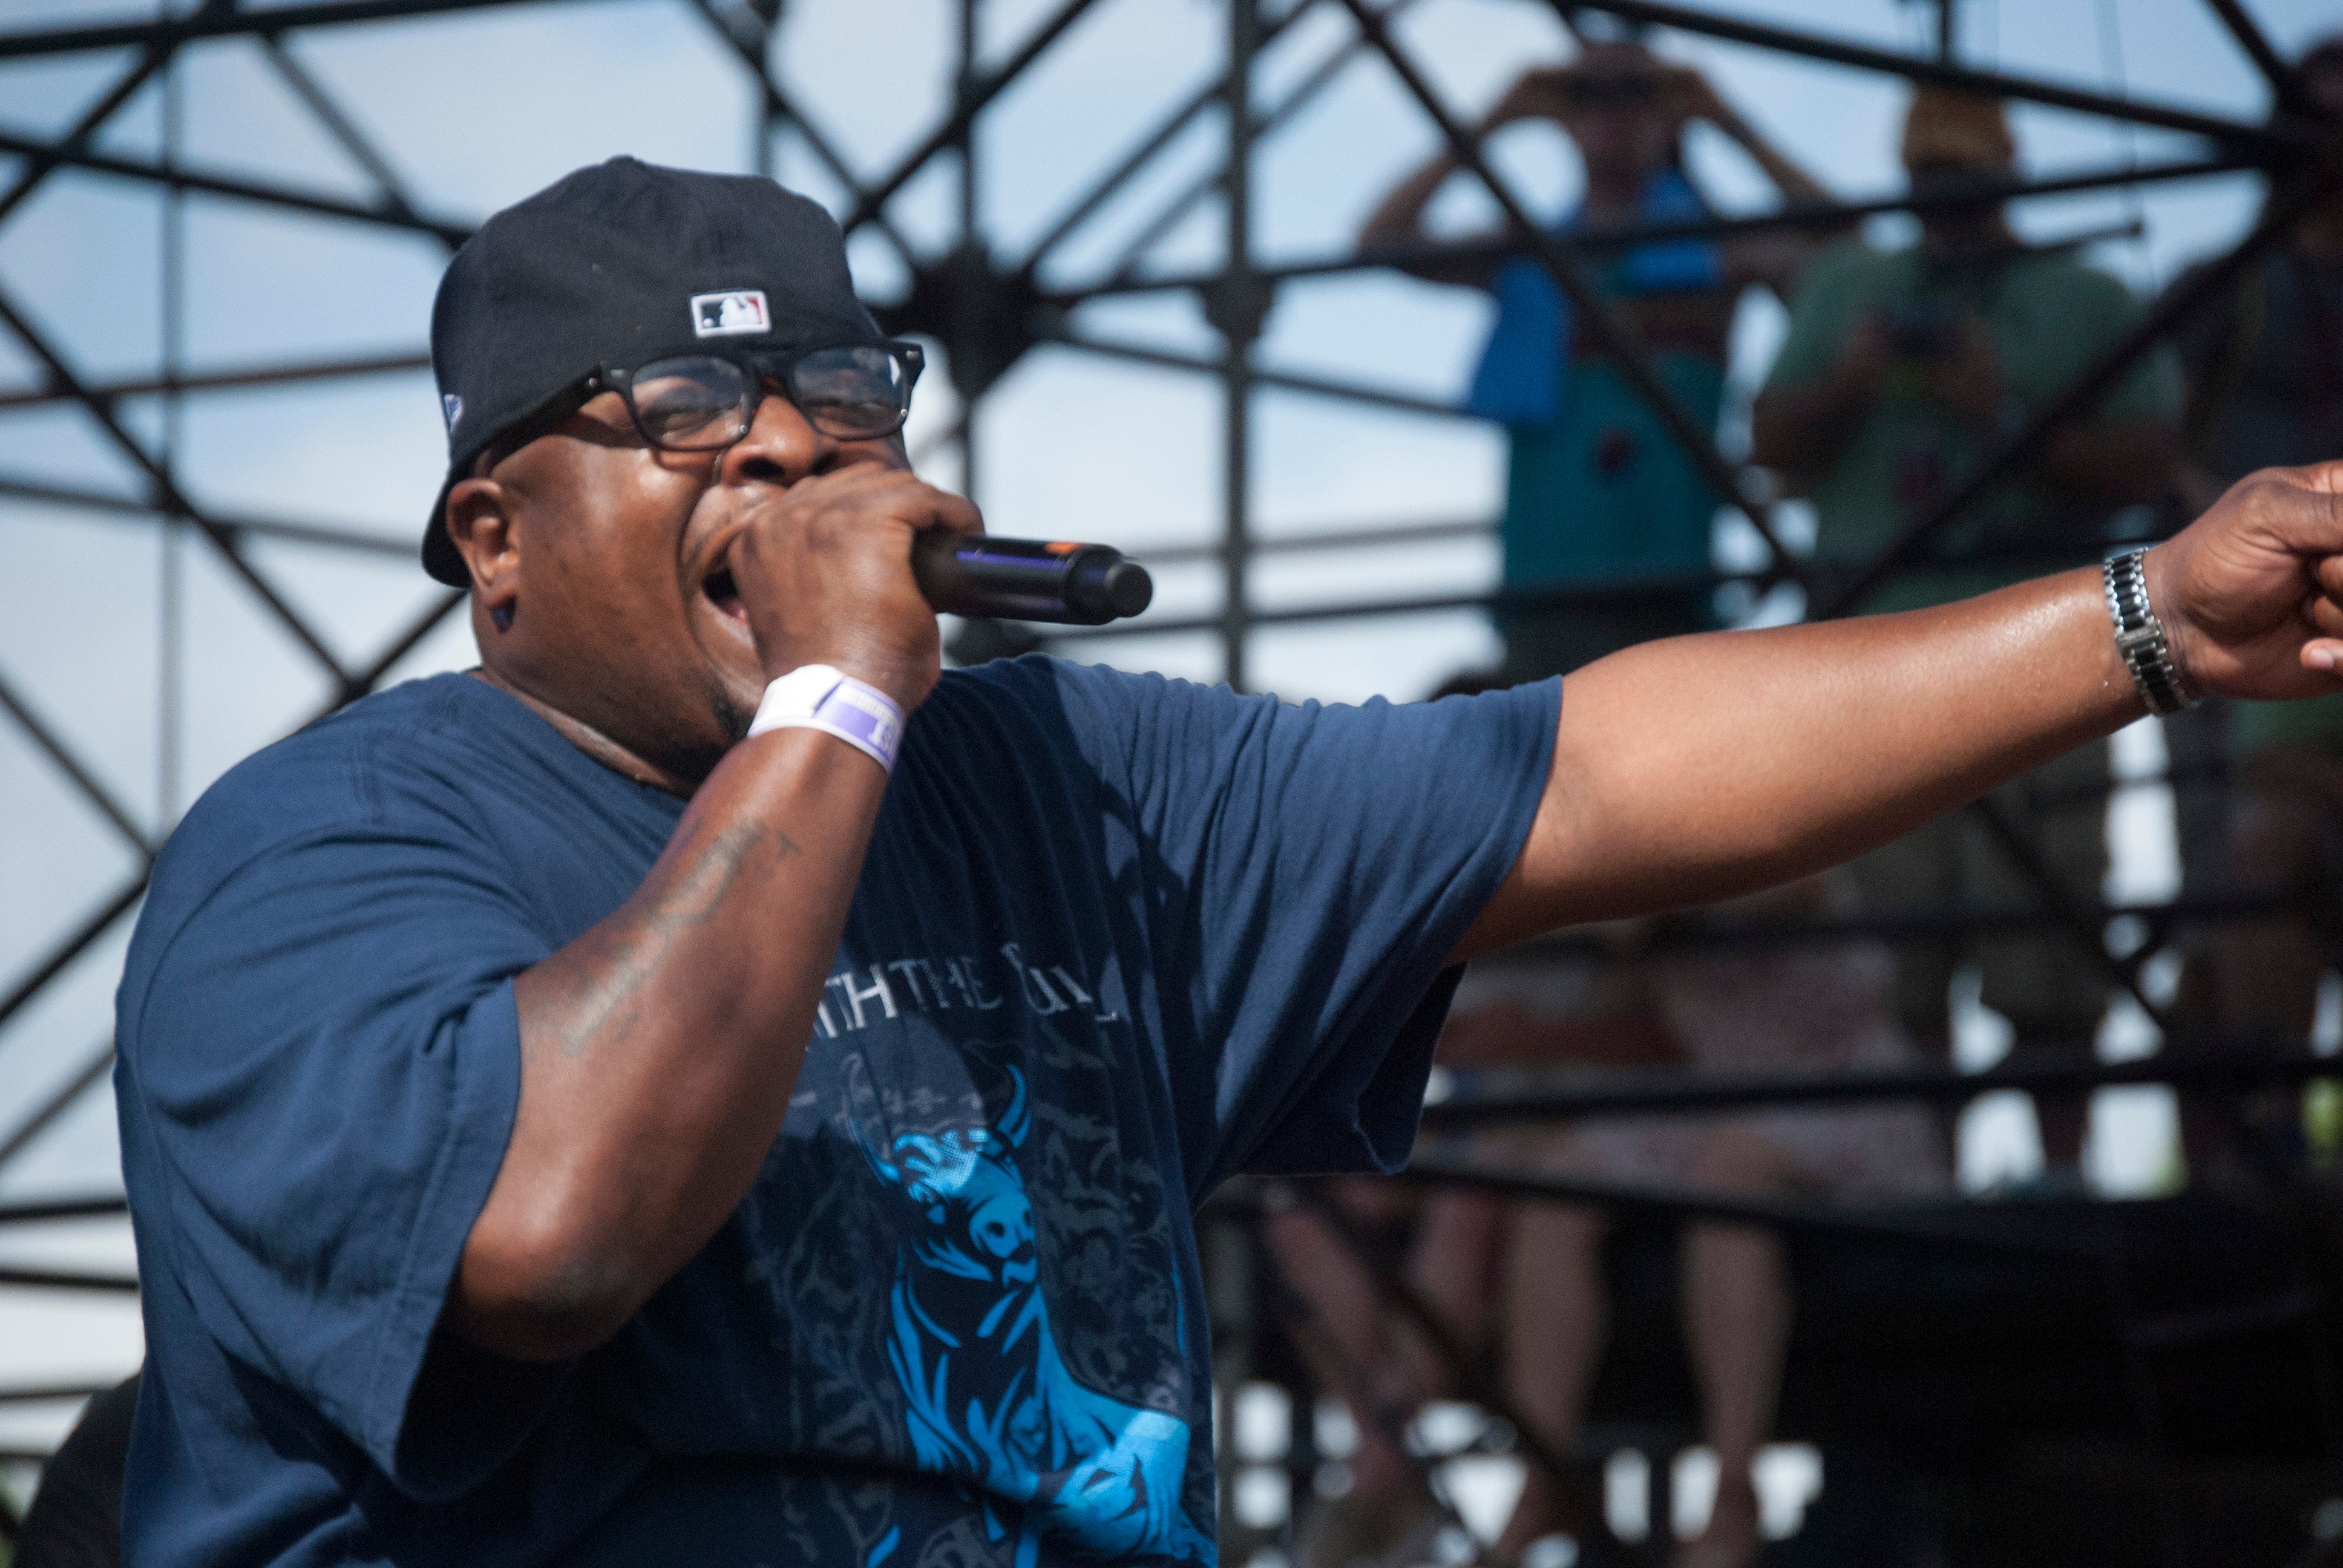 An Evening Of Hip Hop: Scarface, 8 Ball & Mjg, Too Short, Trick Daddy, in Mableton promo photo for Mable House presale offer code